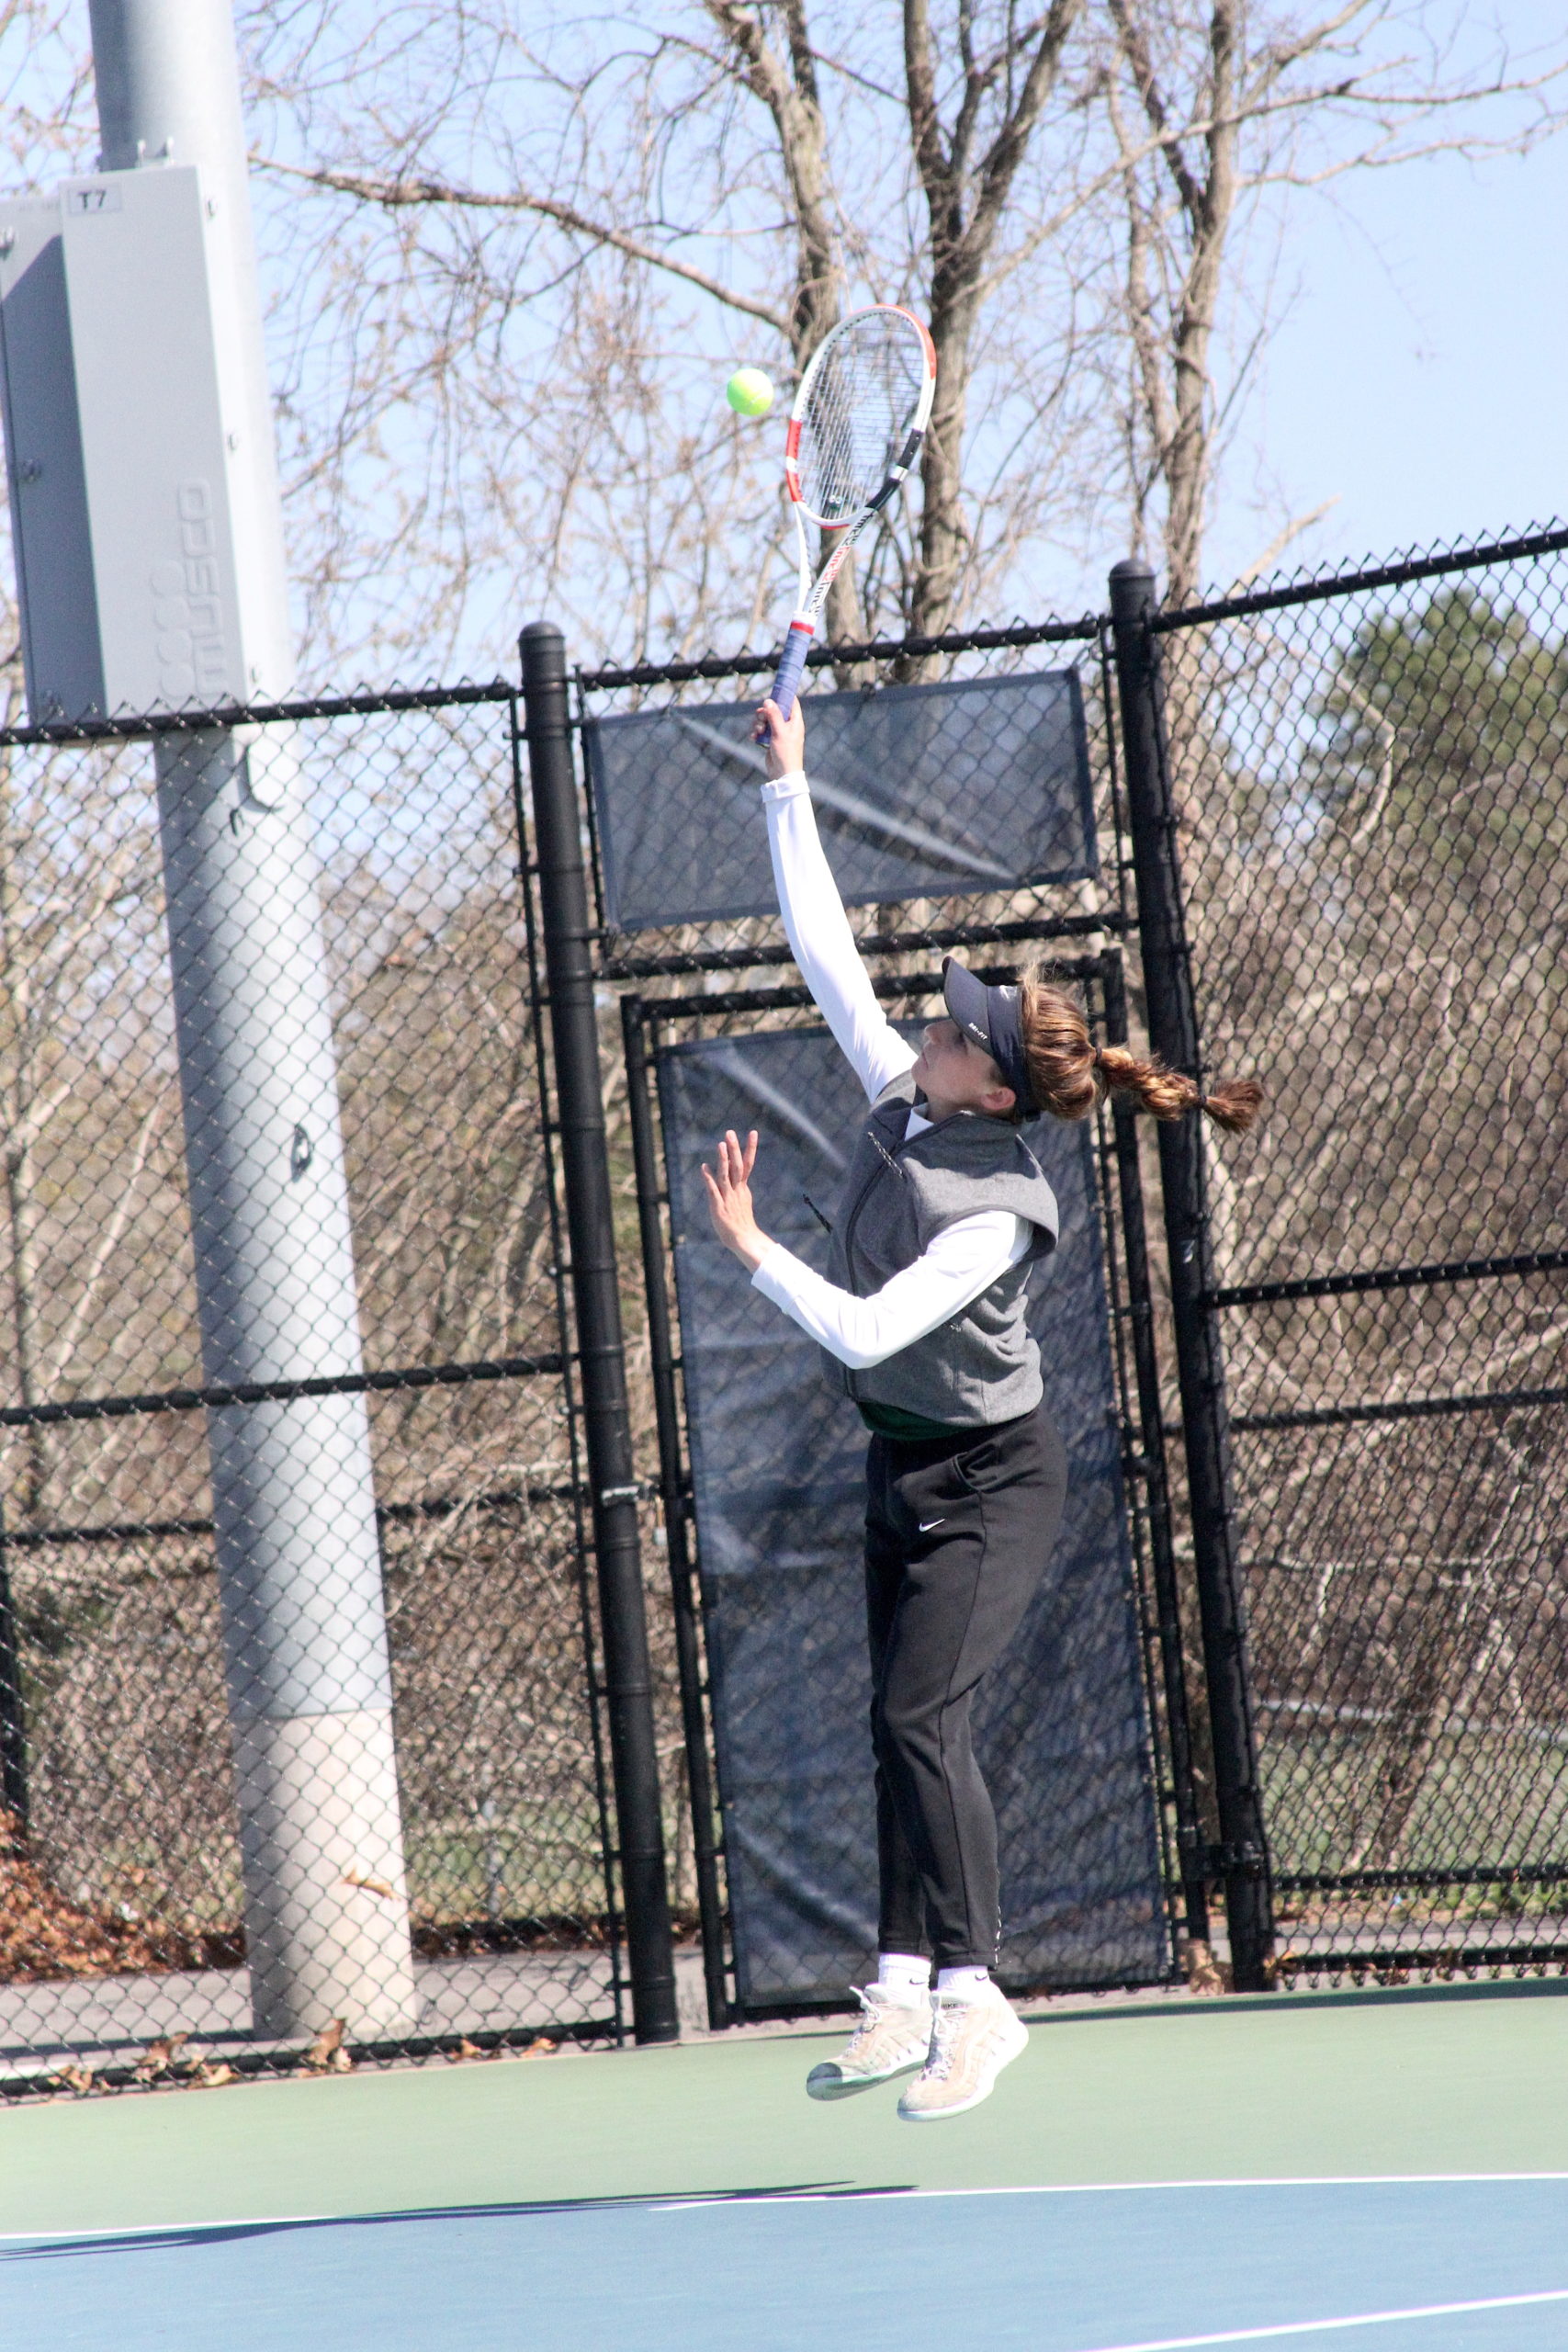 Westhampton Beach junior Rose Hayes serves the ball during her Suffolk County singles quarterfinal match.